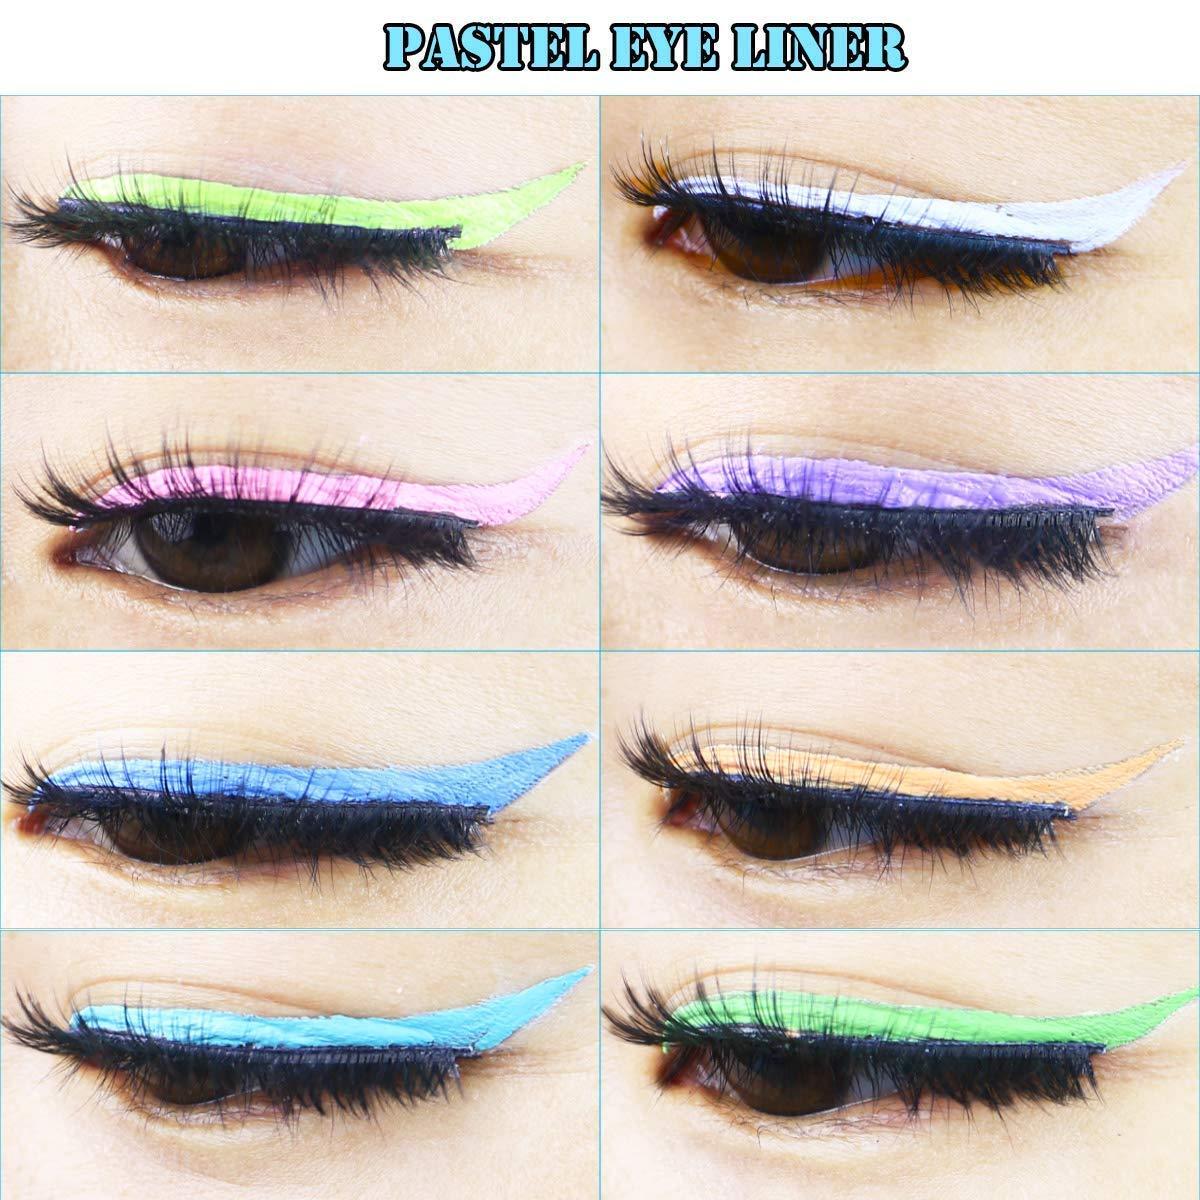 OOKWE Water Activated Eyeliner Retro Graphic Hydra Eye Liner Makeup UV Glow  8 Color 